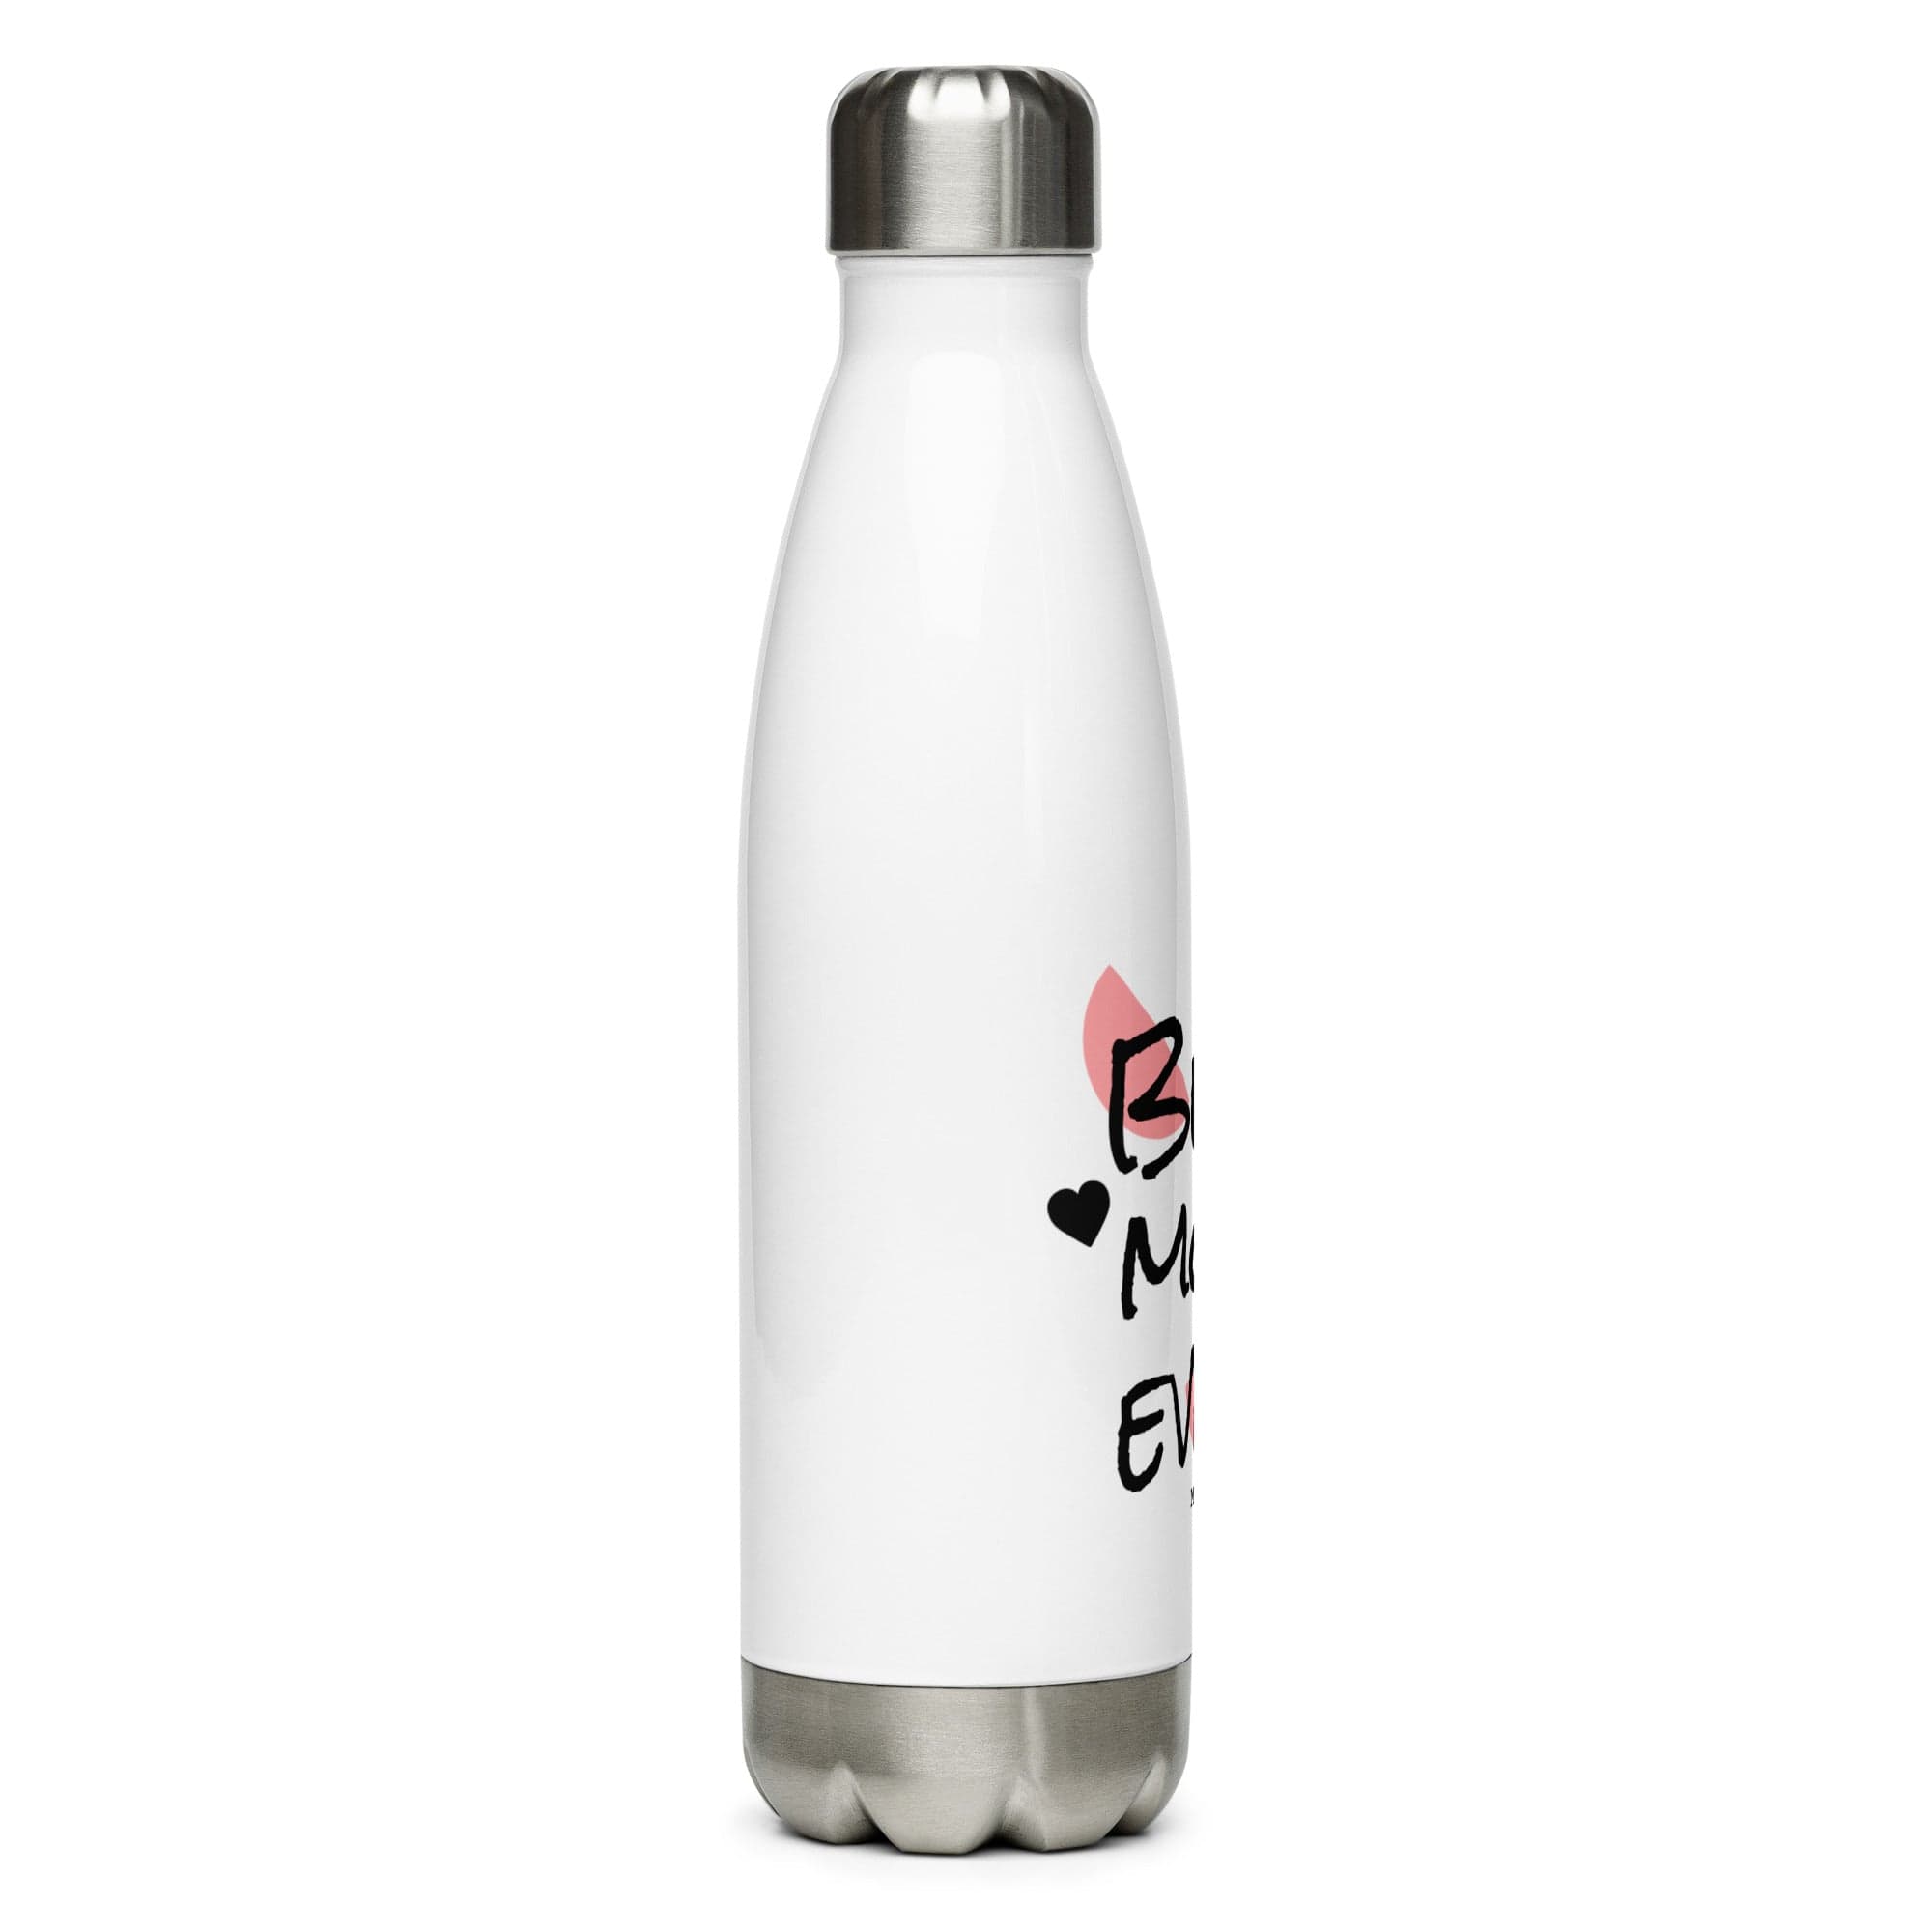 Best Mom Ever - Stainless Steel Water Bottle